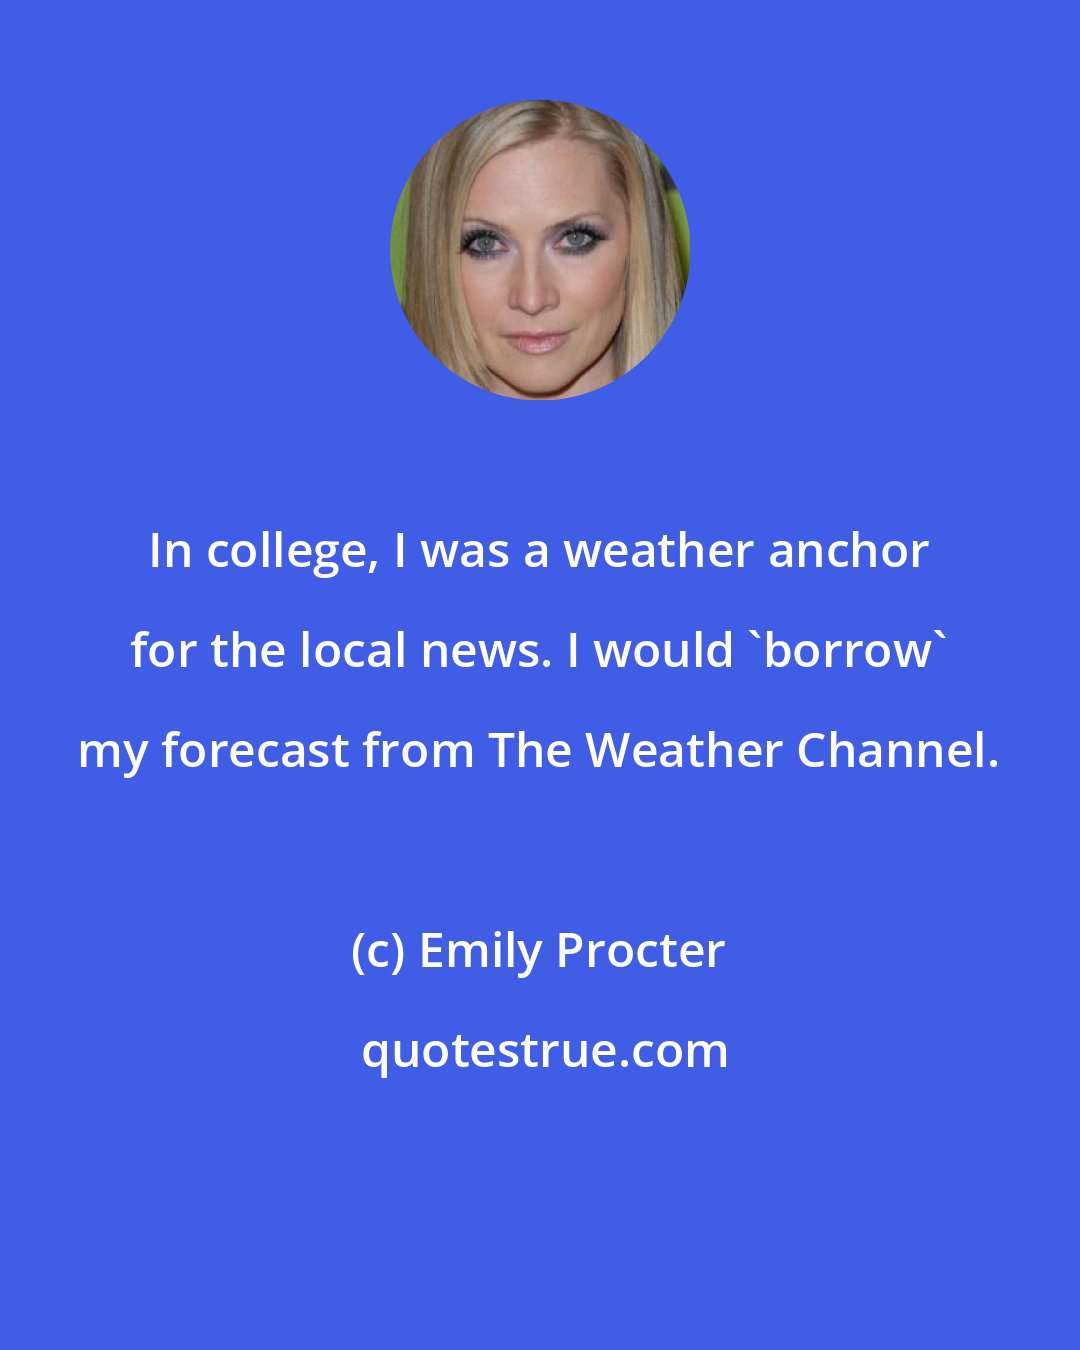 Emily Procter: In college, I was a weather anchor for the local news. I would 'borrow' my forecast from The Weather Channel.